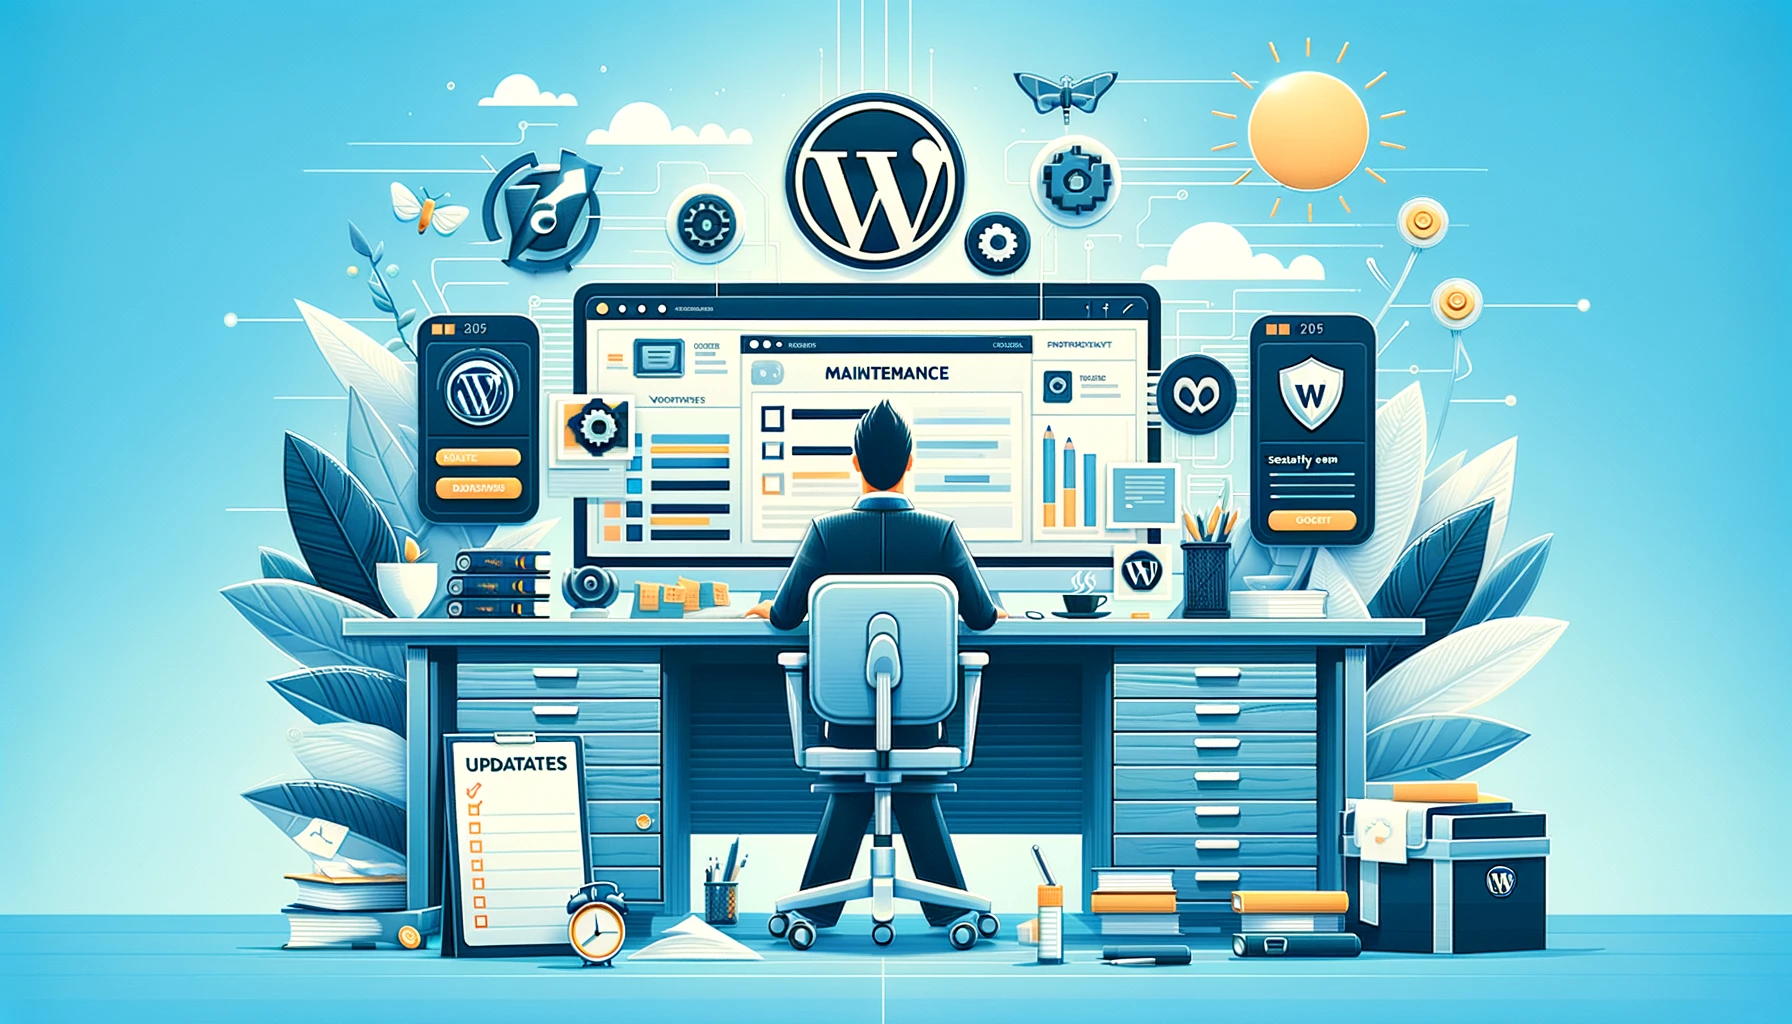 Maintenance de site internet | Maintenance WordPress DALL·E 2024 02 20 10.10.51 Craft a landscape oriented image that encapsulates the service of WordPress maintenance. The scene should feature a modern and clean workspace with a